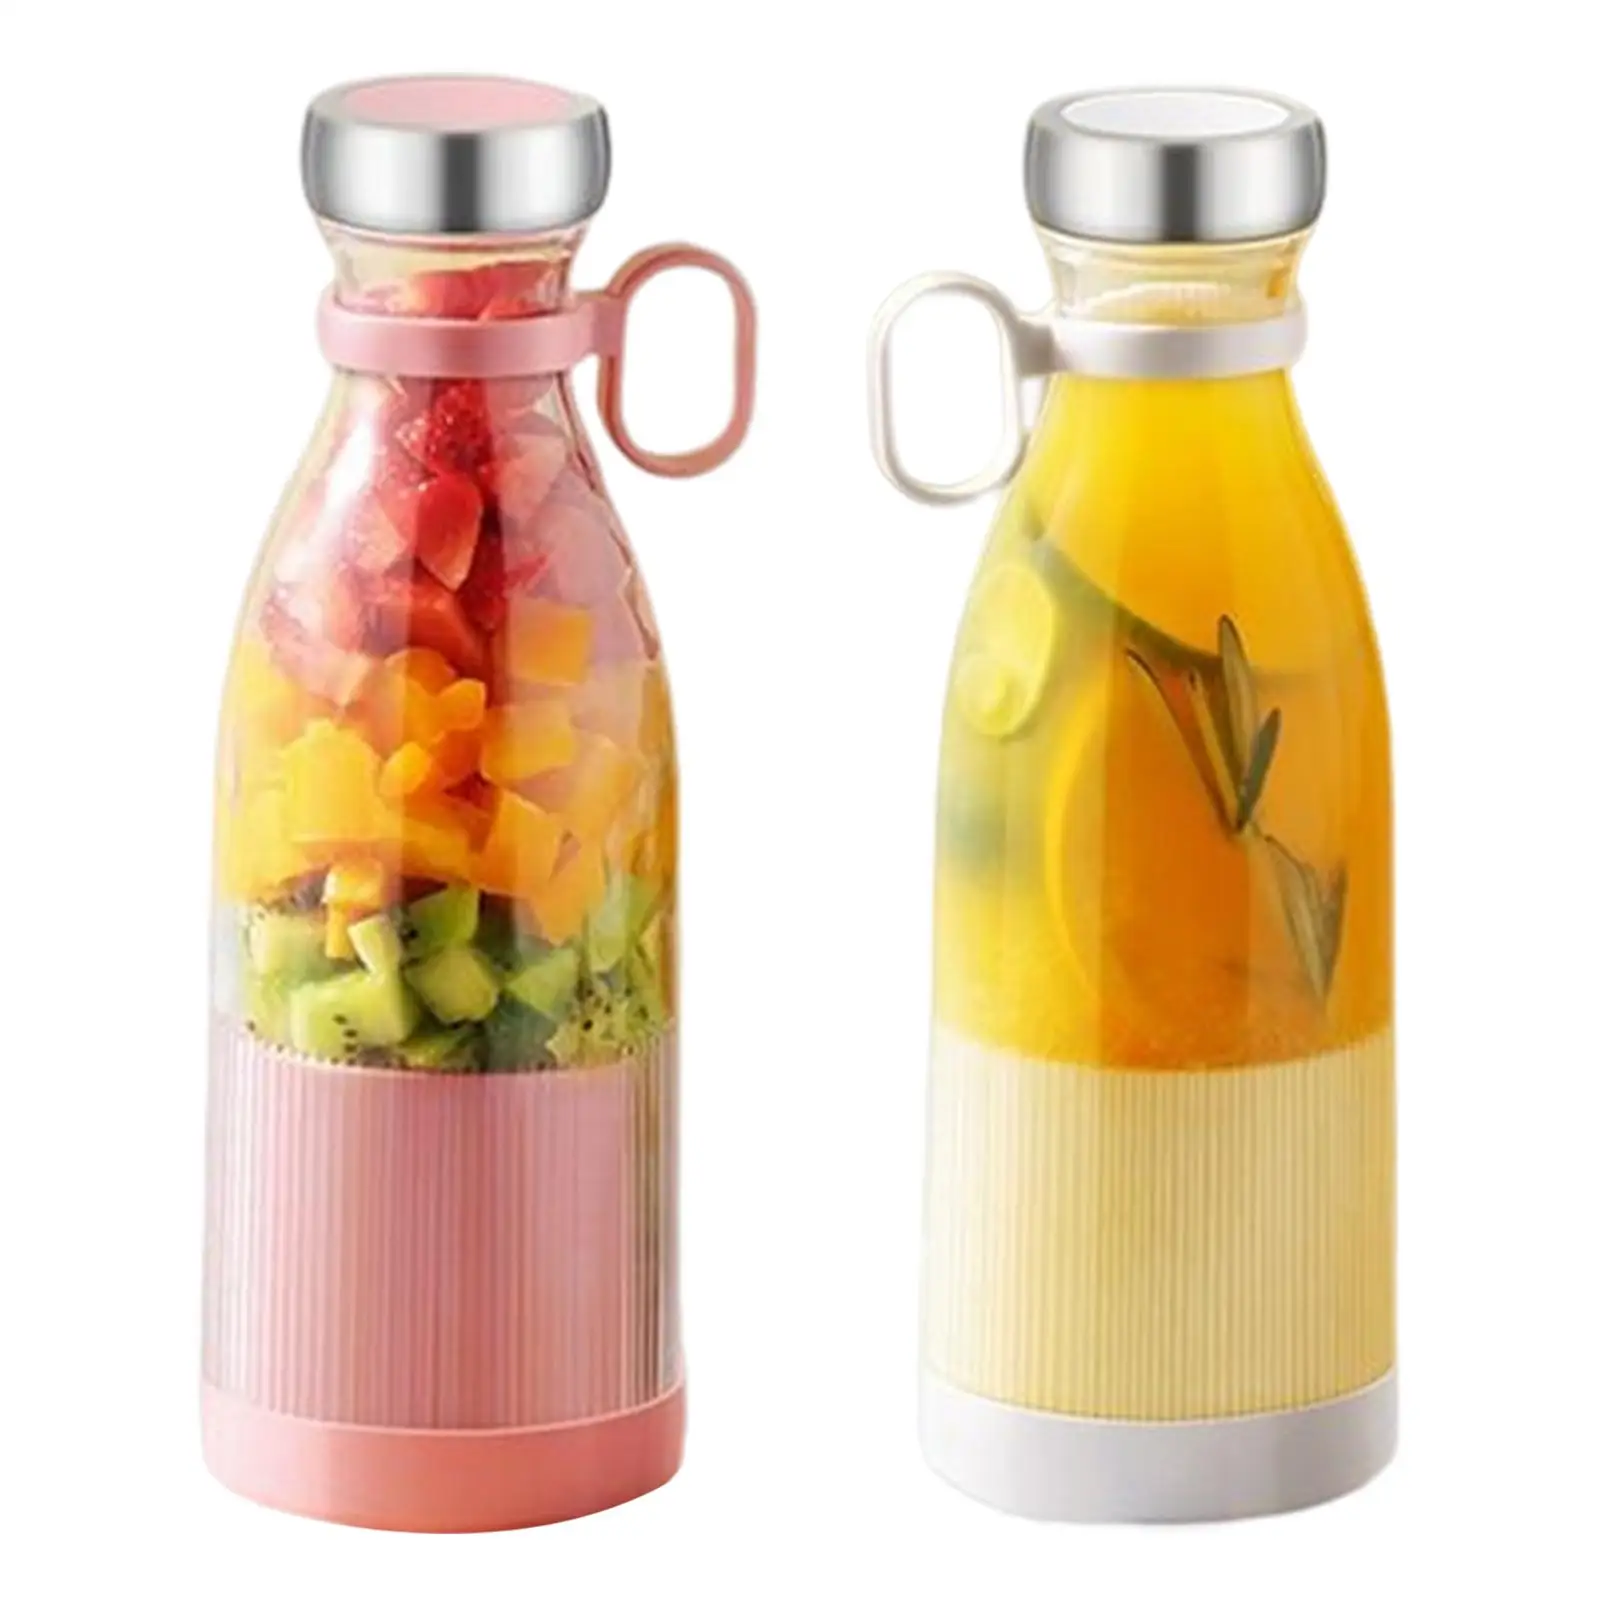 Multifunction Electric Juicer Portable Fruit Juicing Cup Blender USB Rechargeable Fruit Mixers mini Home Outdoor Shakes Food